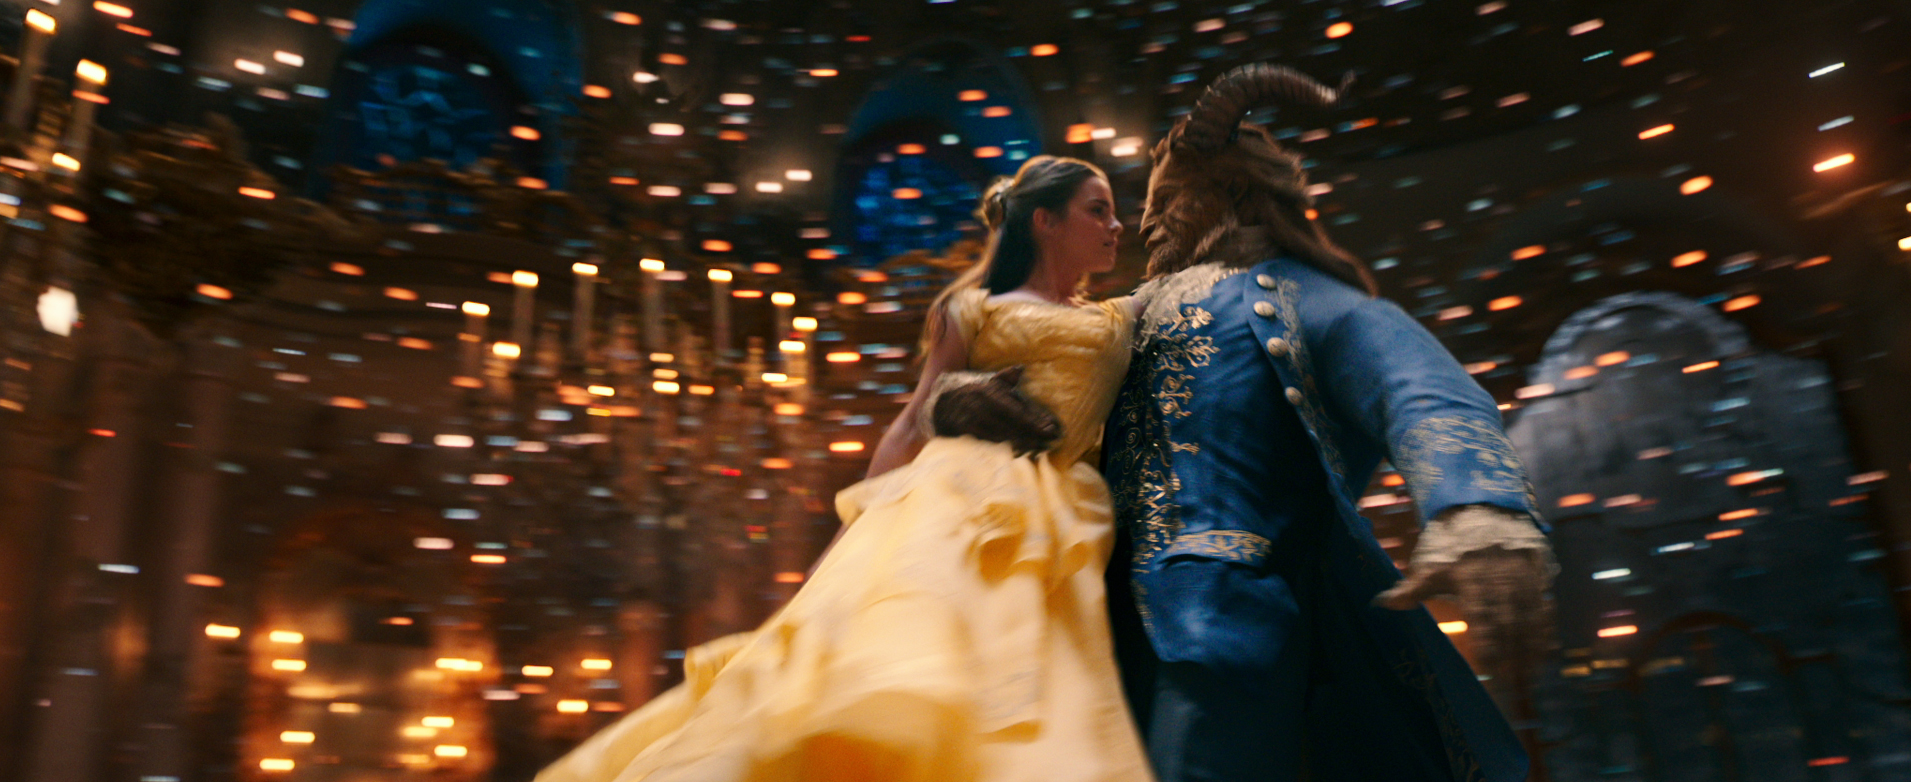 New Trailer and Images Arrive for Disney’s Live-Action Beauty and the Beast!